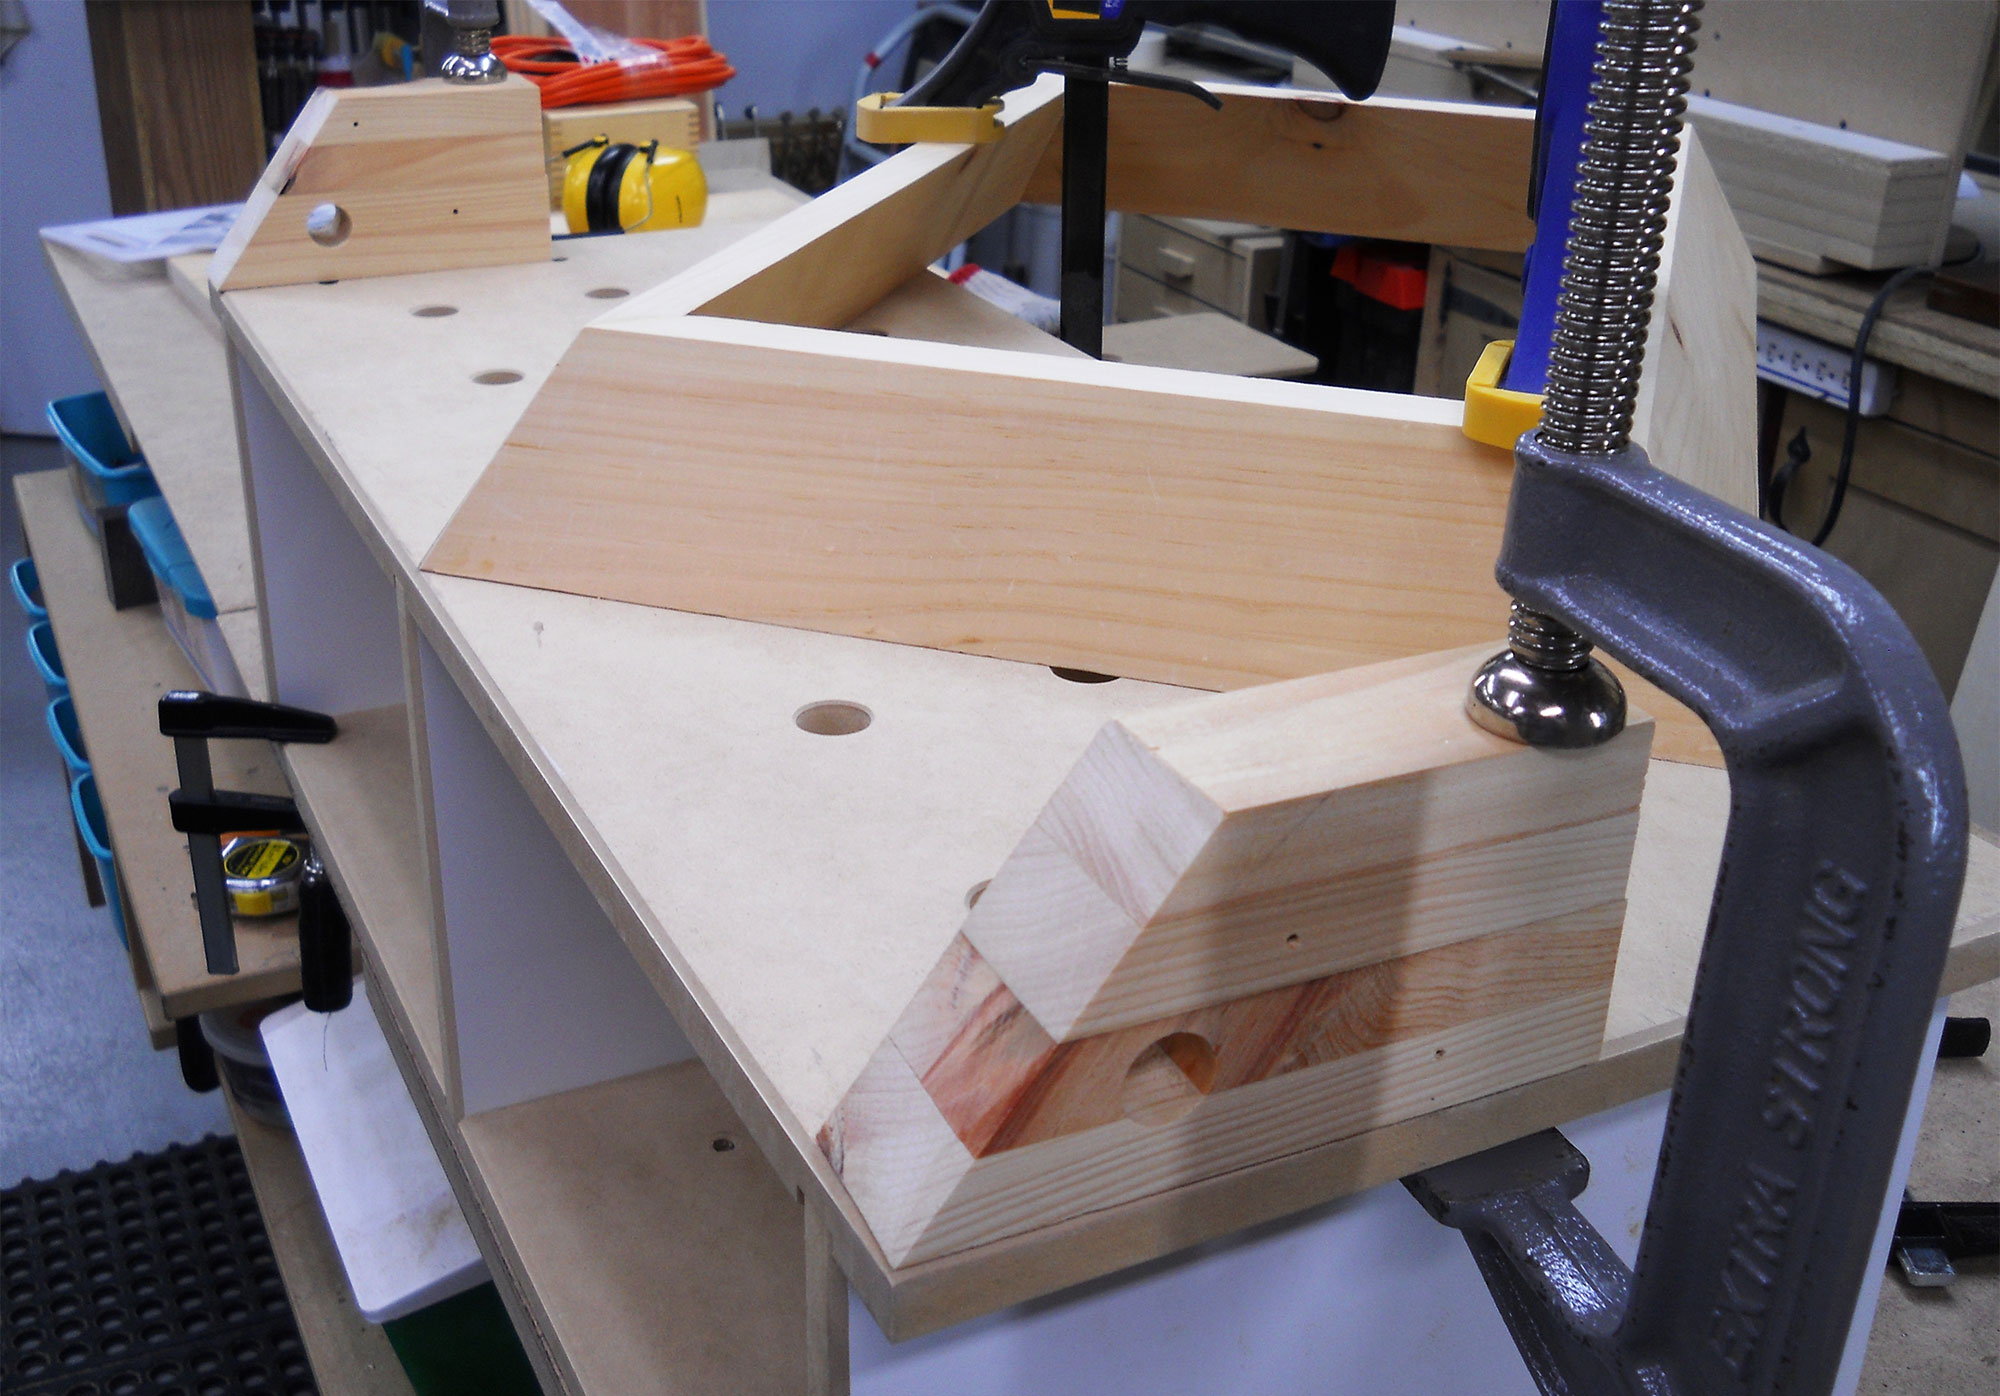 Clamping frame to  work surface.